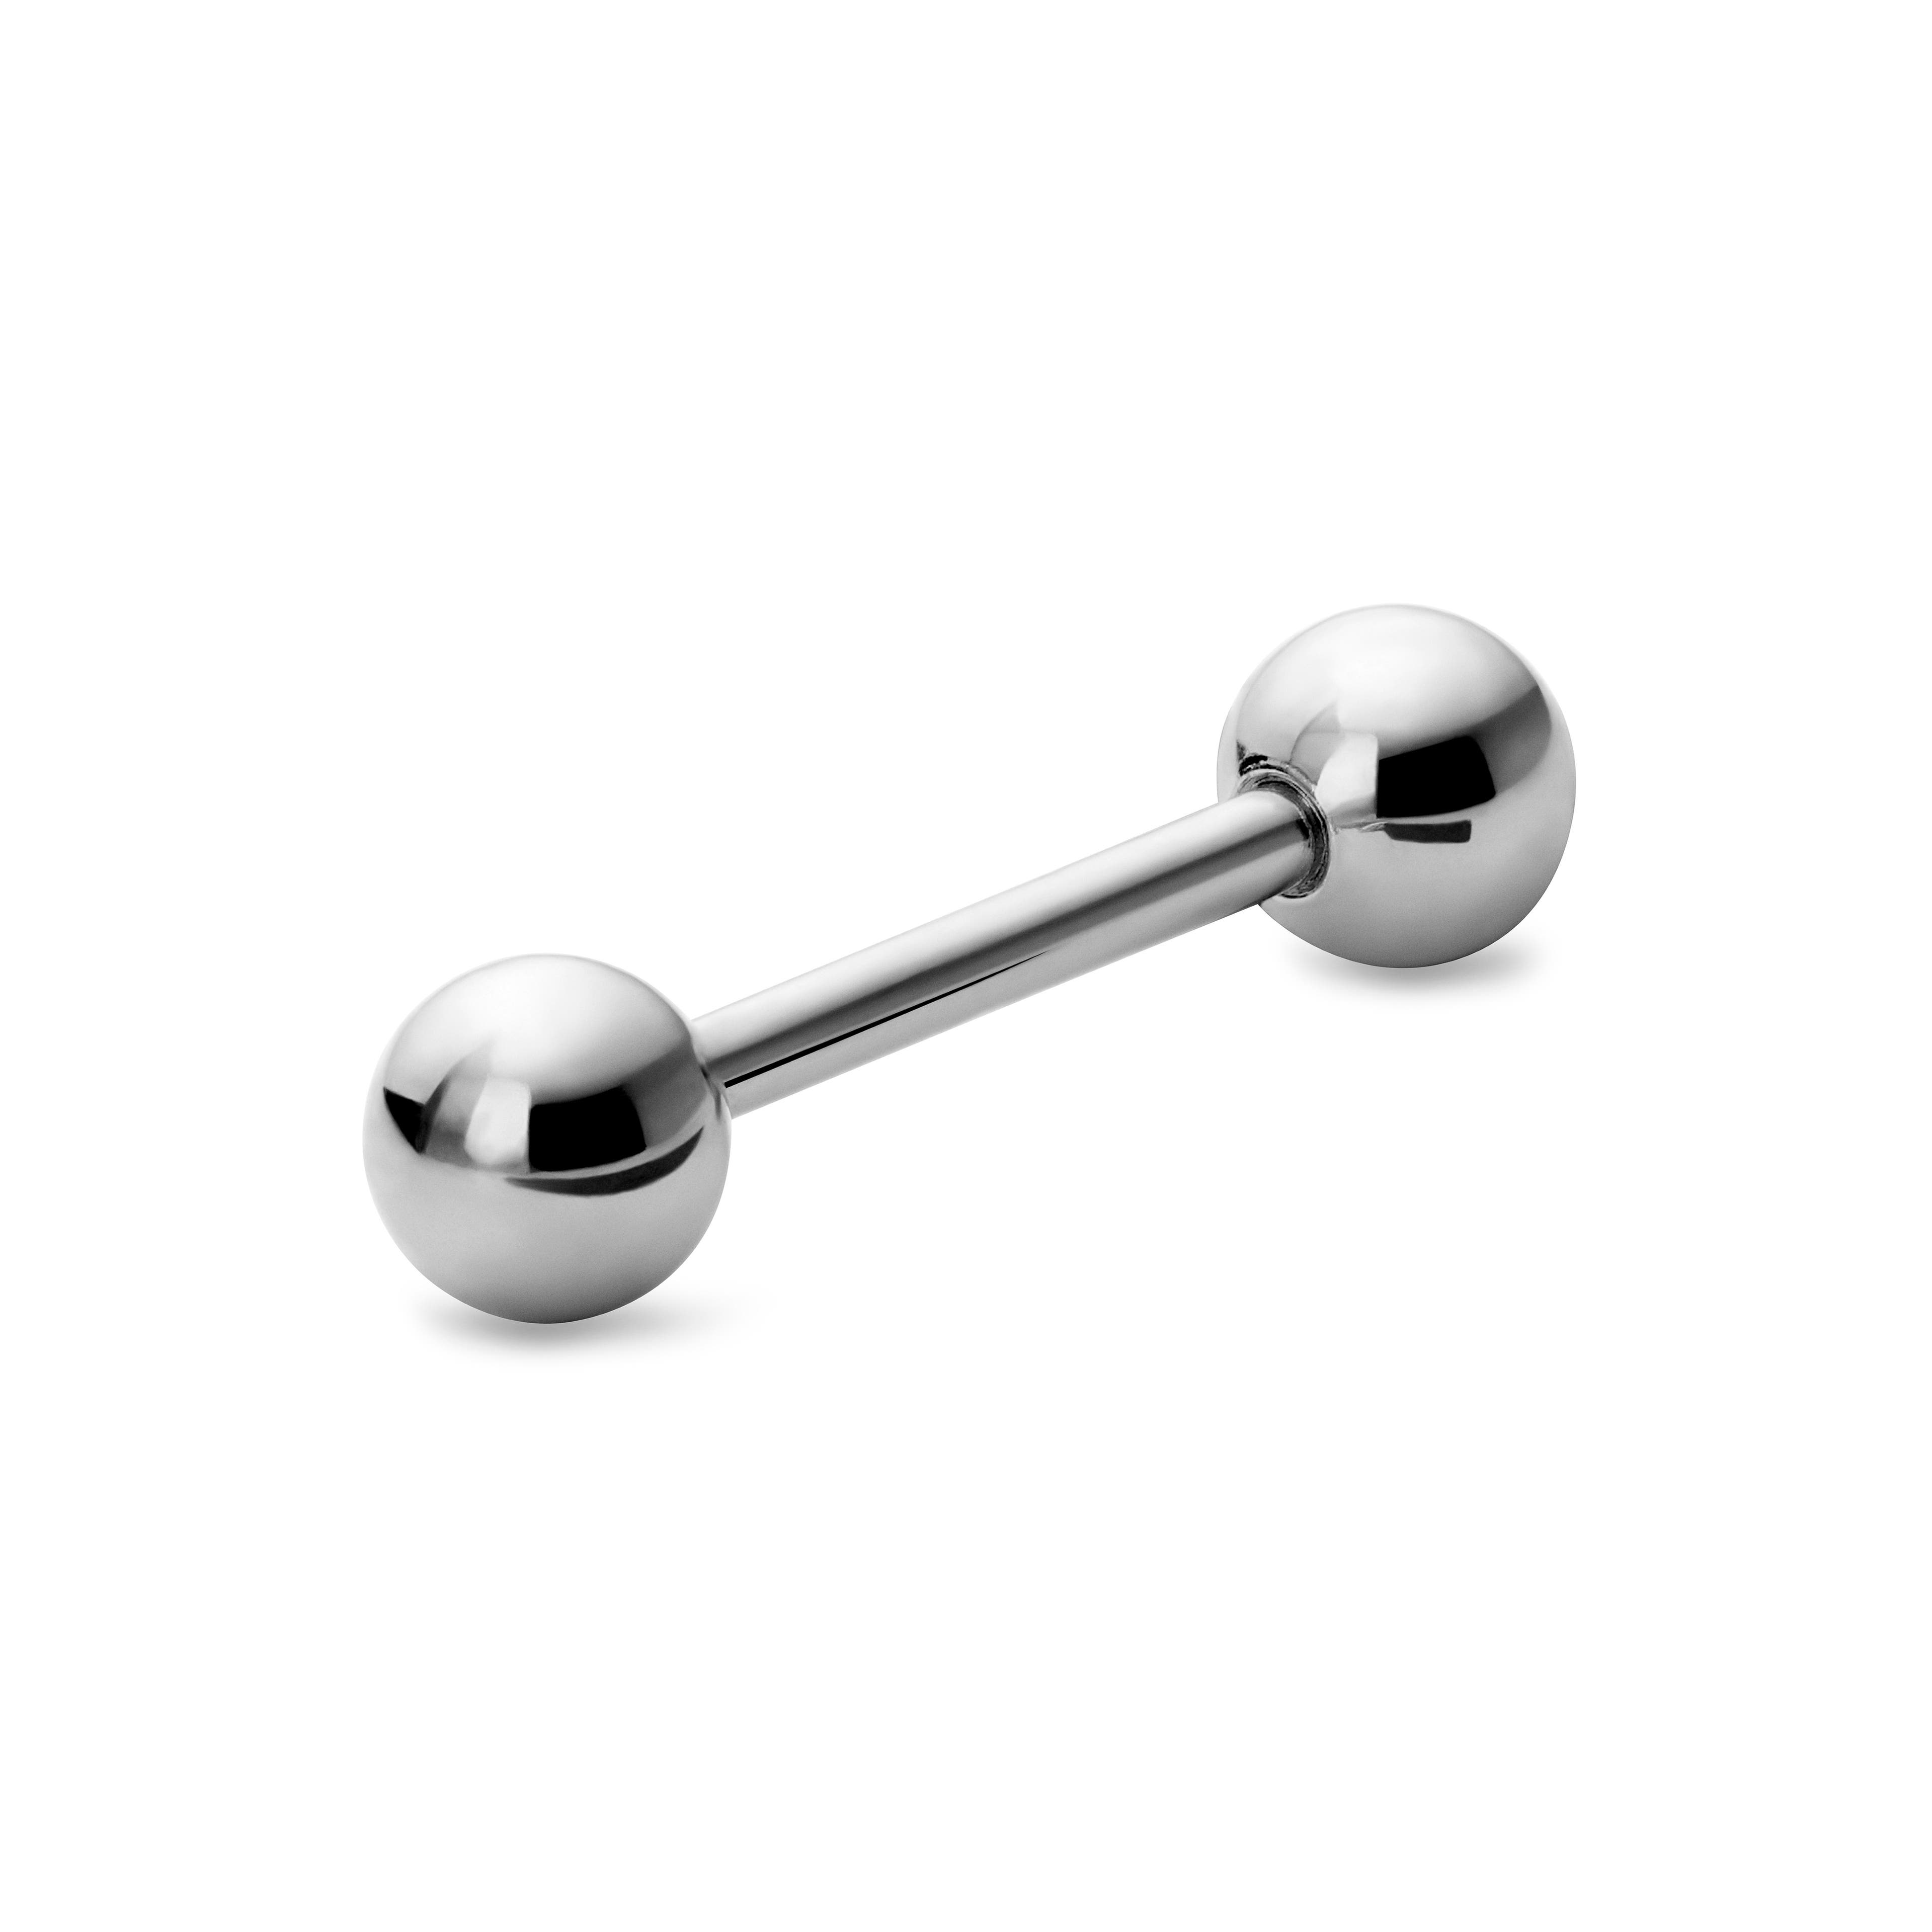 1/3" (8 mm) Silver-Tone Straight Ball-Tipped Titanium Barbell